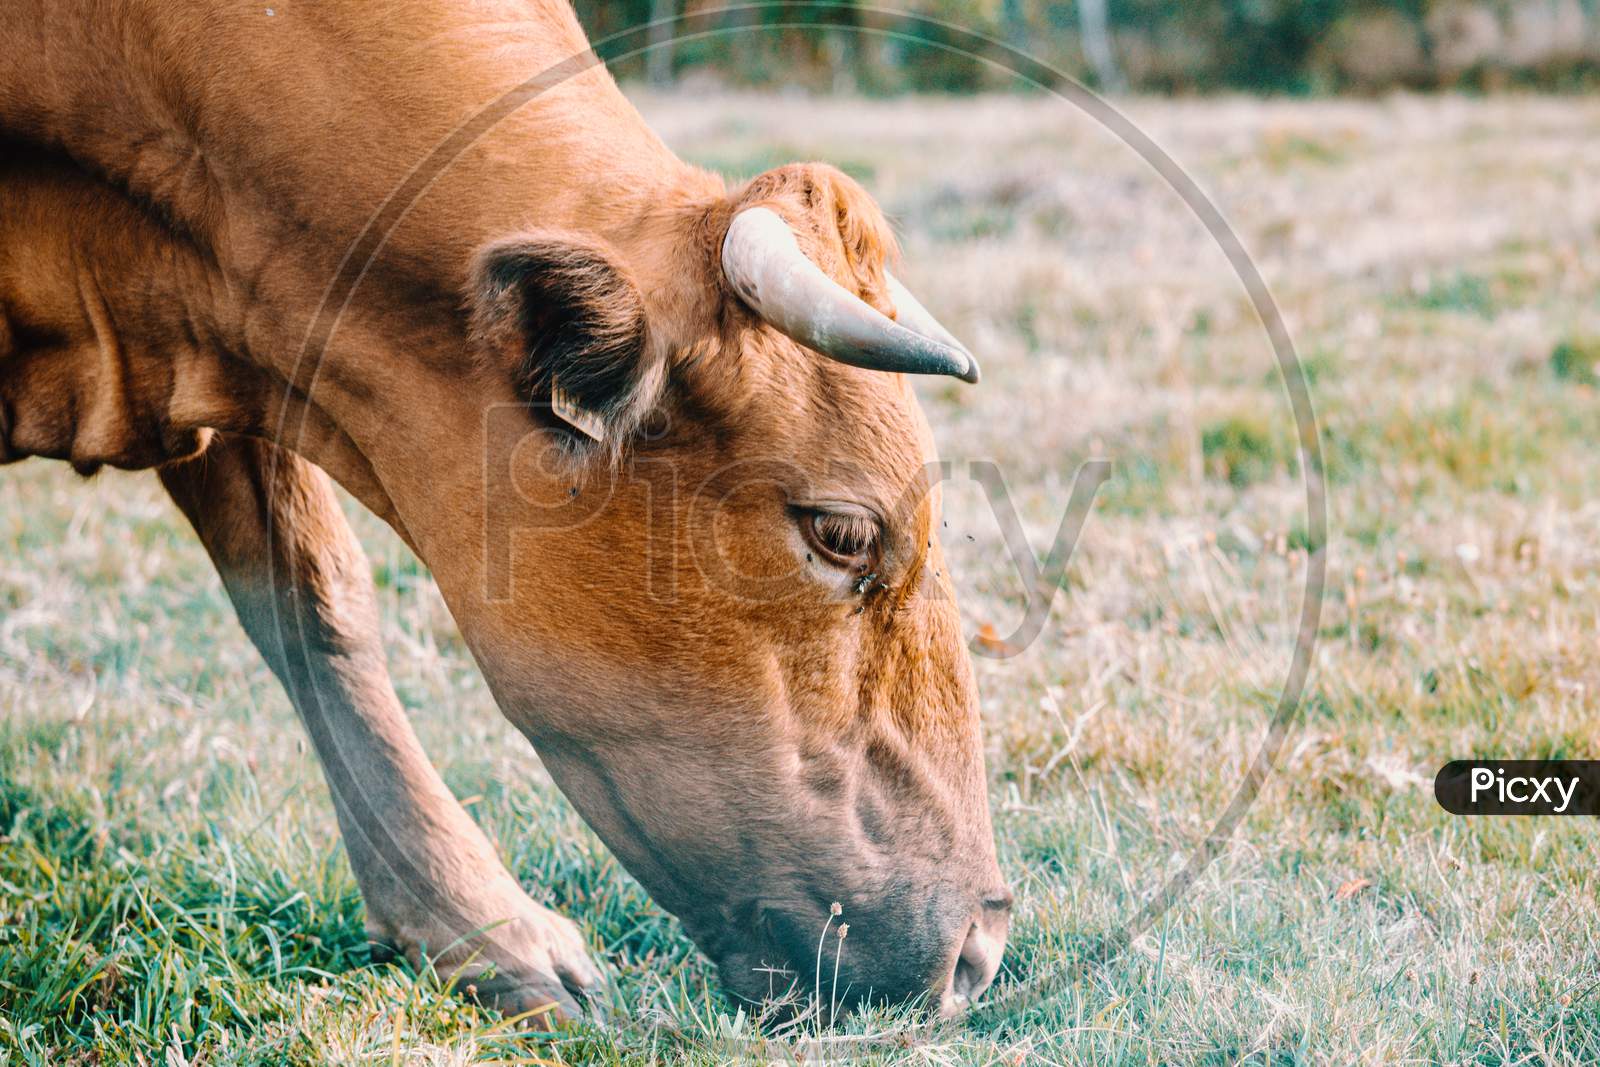 Brown Cow With Giant Horns Eating Grass In The Farm